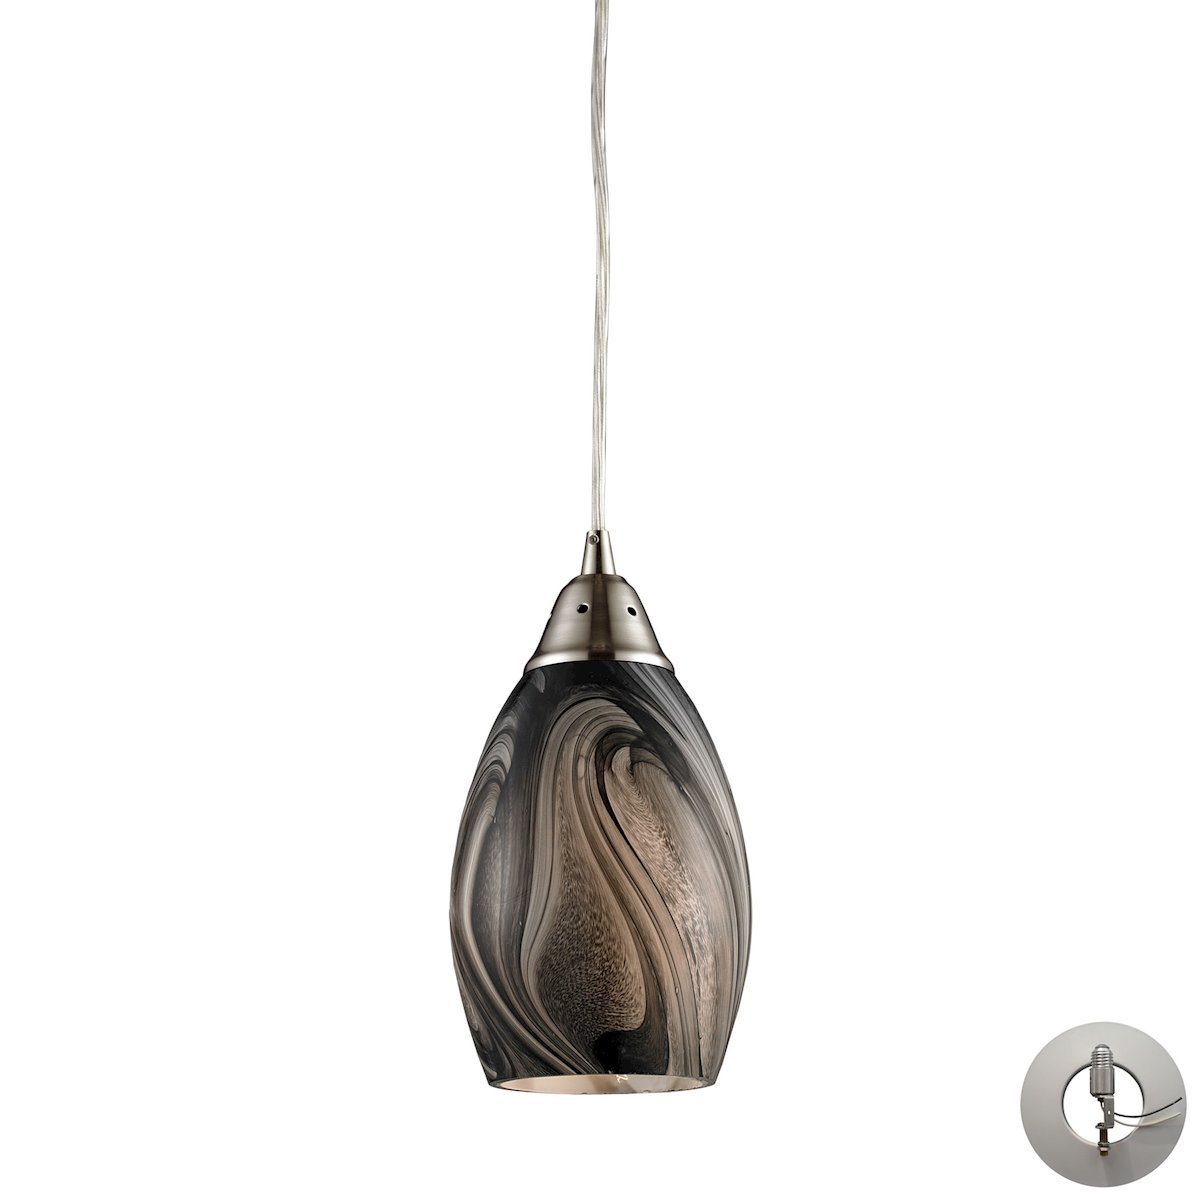 Formations Pendant In Satin Nickel And Ashflow Glass - Includes Recessed Lighting Kit Ceiling Elk Lighting 